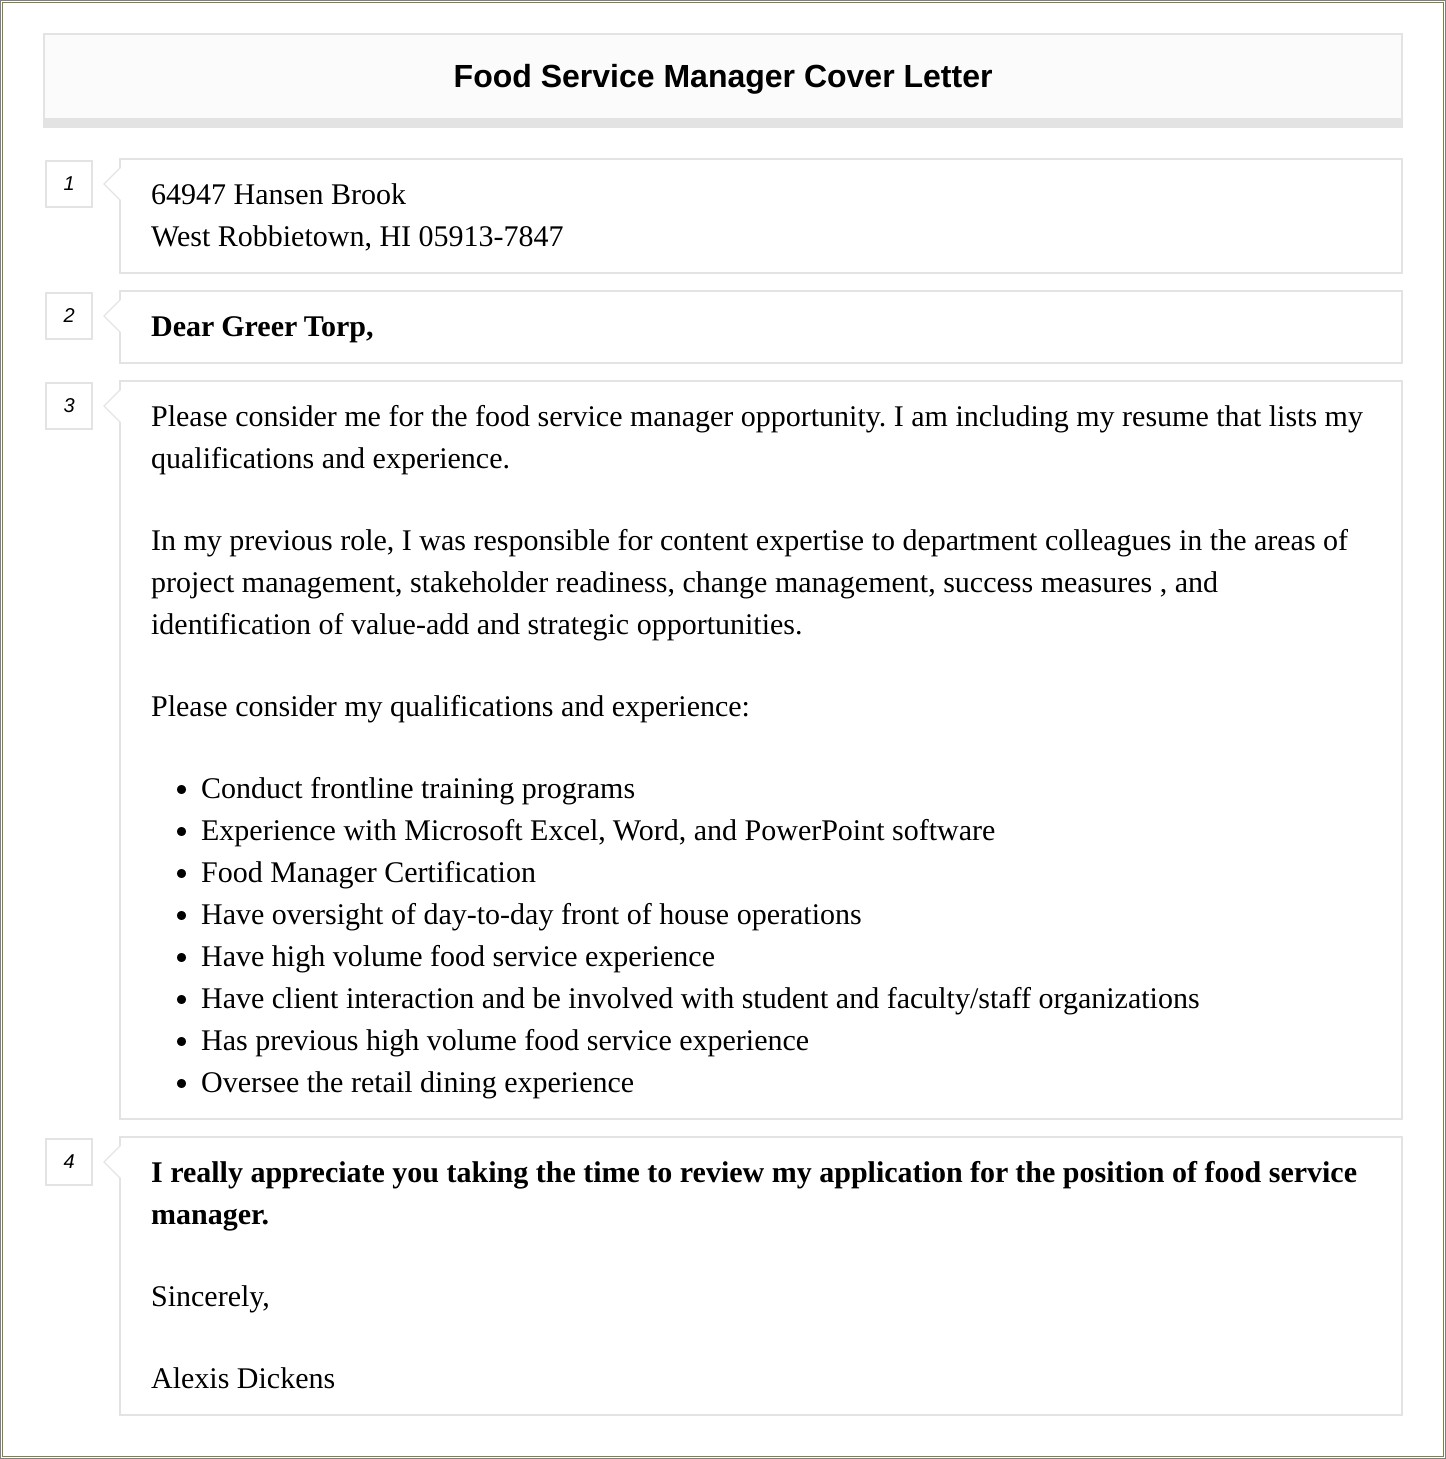 Food Service Manager Resume Cover Letter